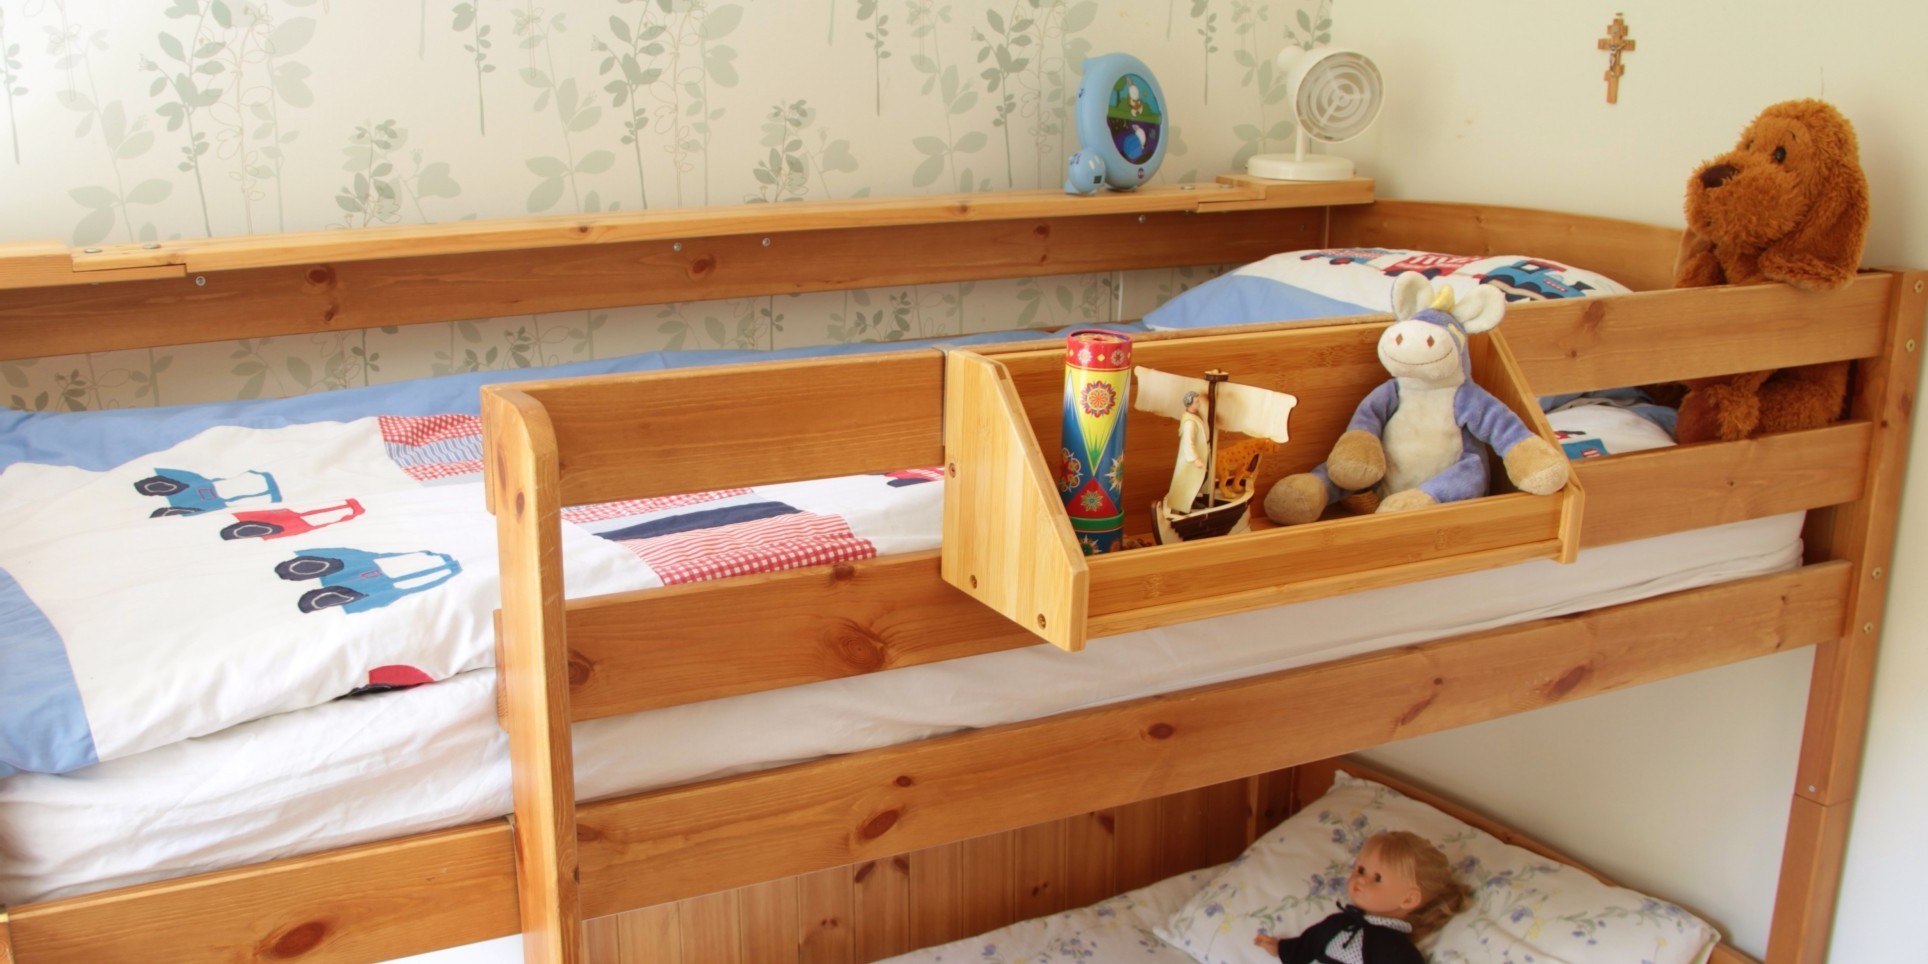 Bed Hanging Toys Shelf | Clip on Bed Shelf | Bamboo Bedside Table